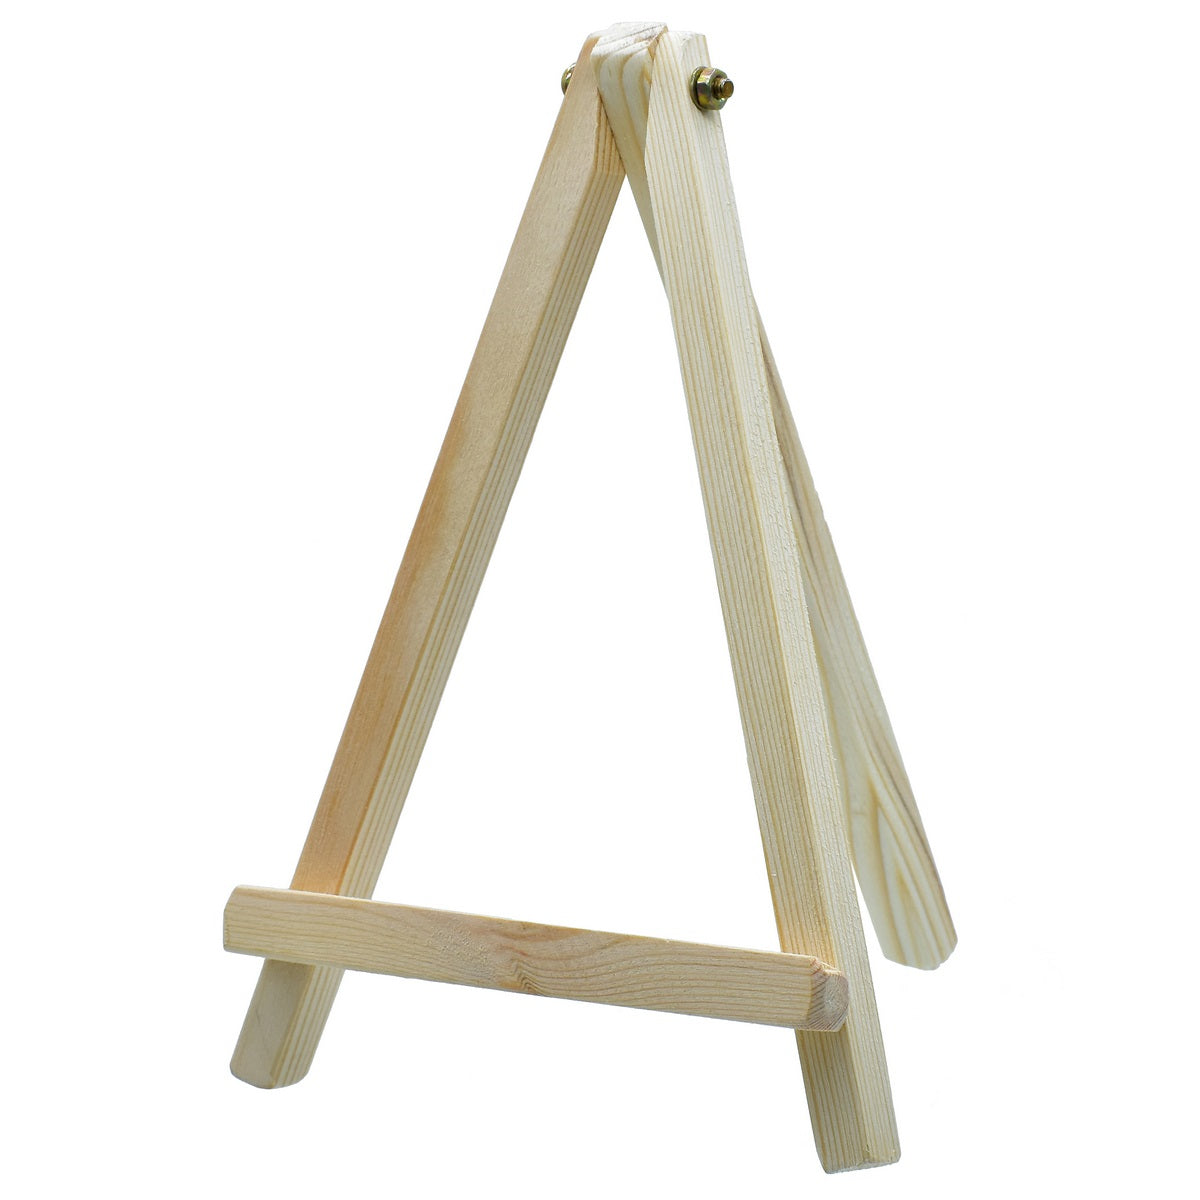 jags-mumbai Easel Wooden Easel Stand Natural 8 Inch